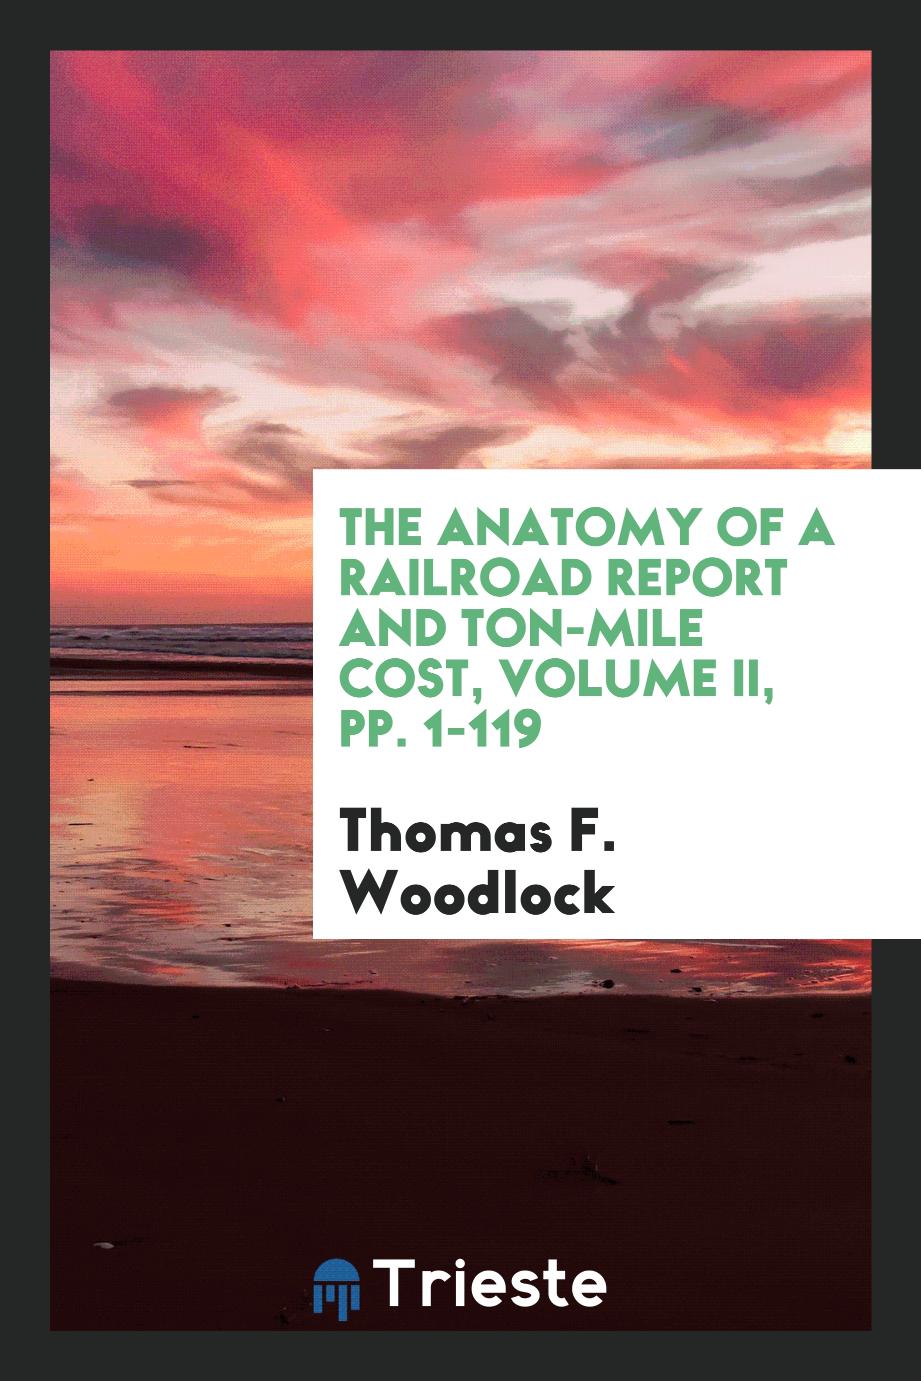 The Anatomy of a Railroad Report and Ton-Mile Cost, Volume II, pp. 1-119